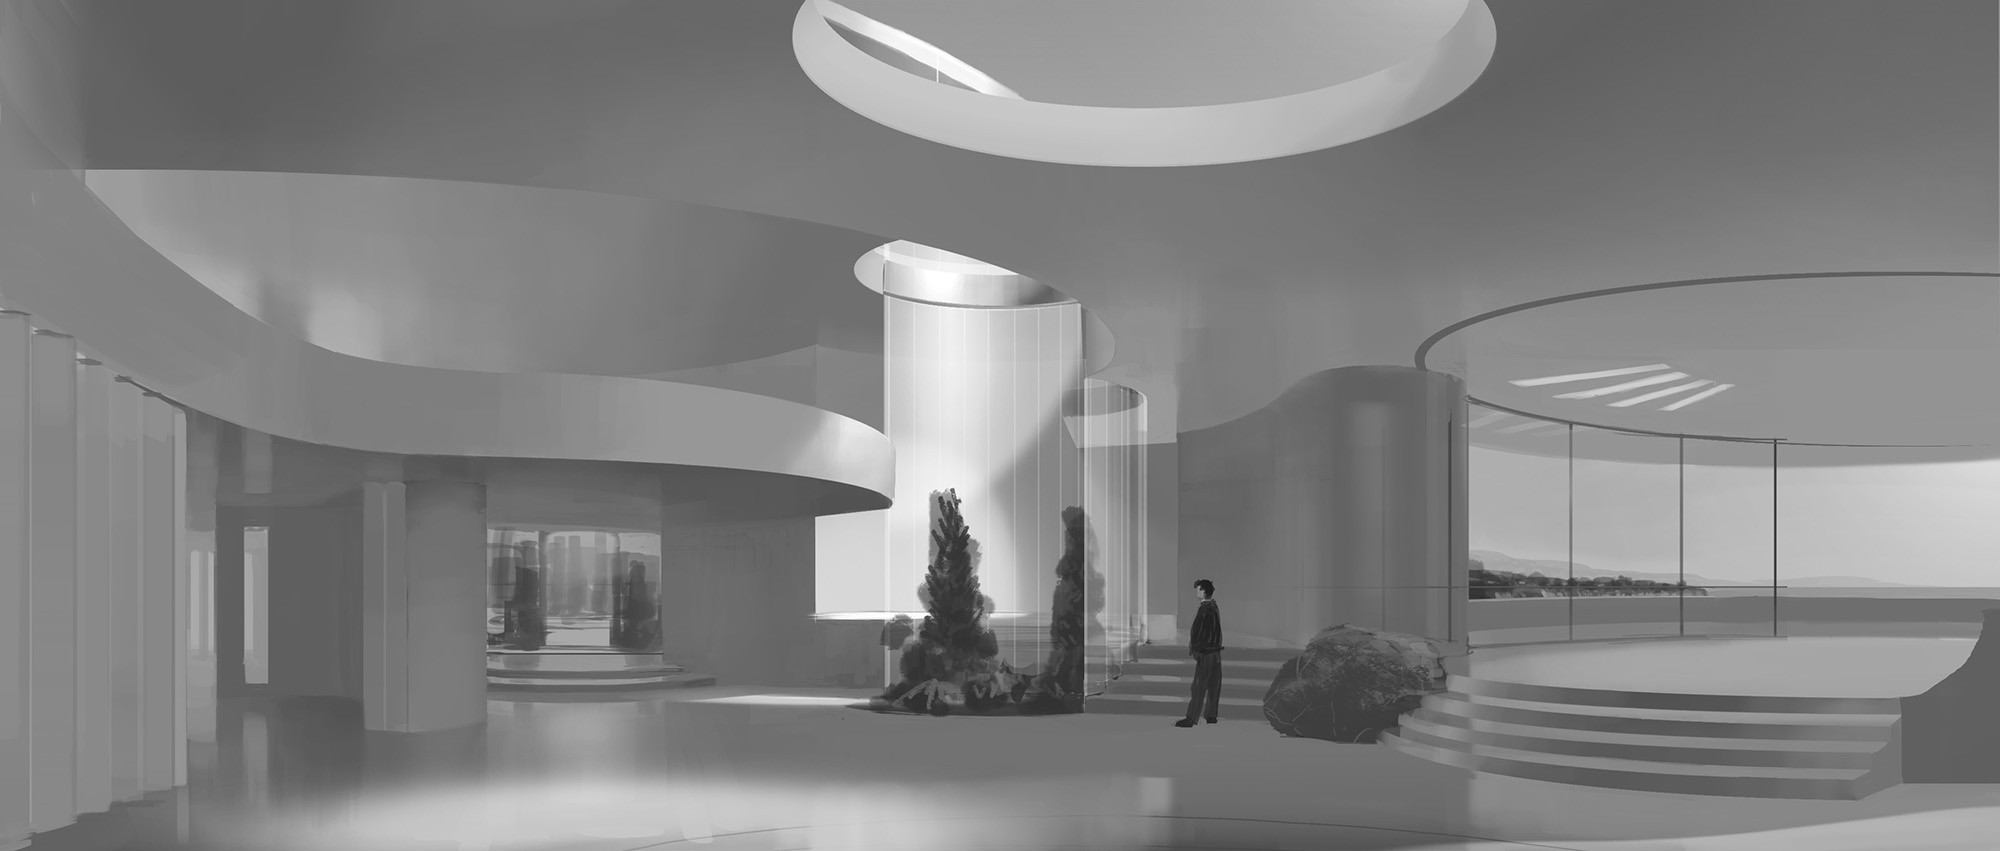 Early work-in-progress to show how I work out architectural forms with values and lighting. 